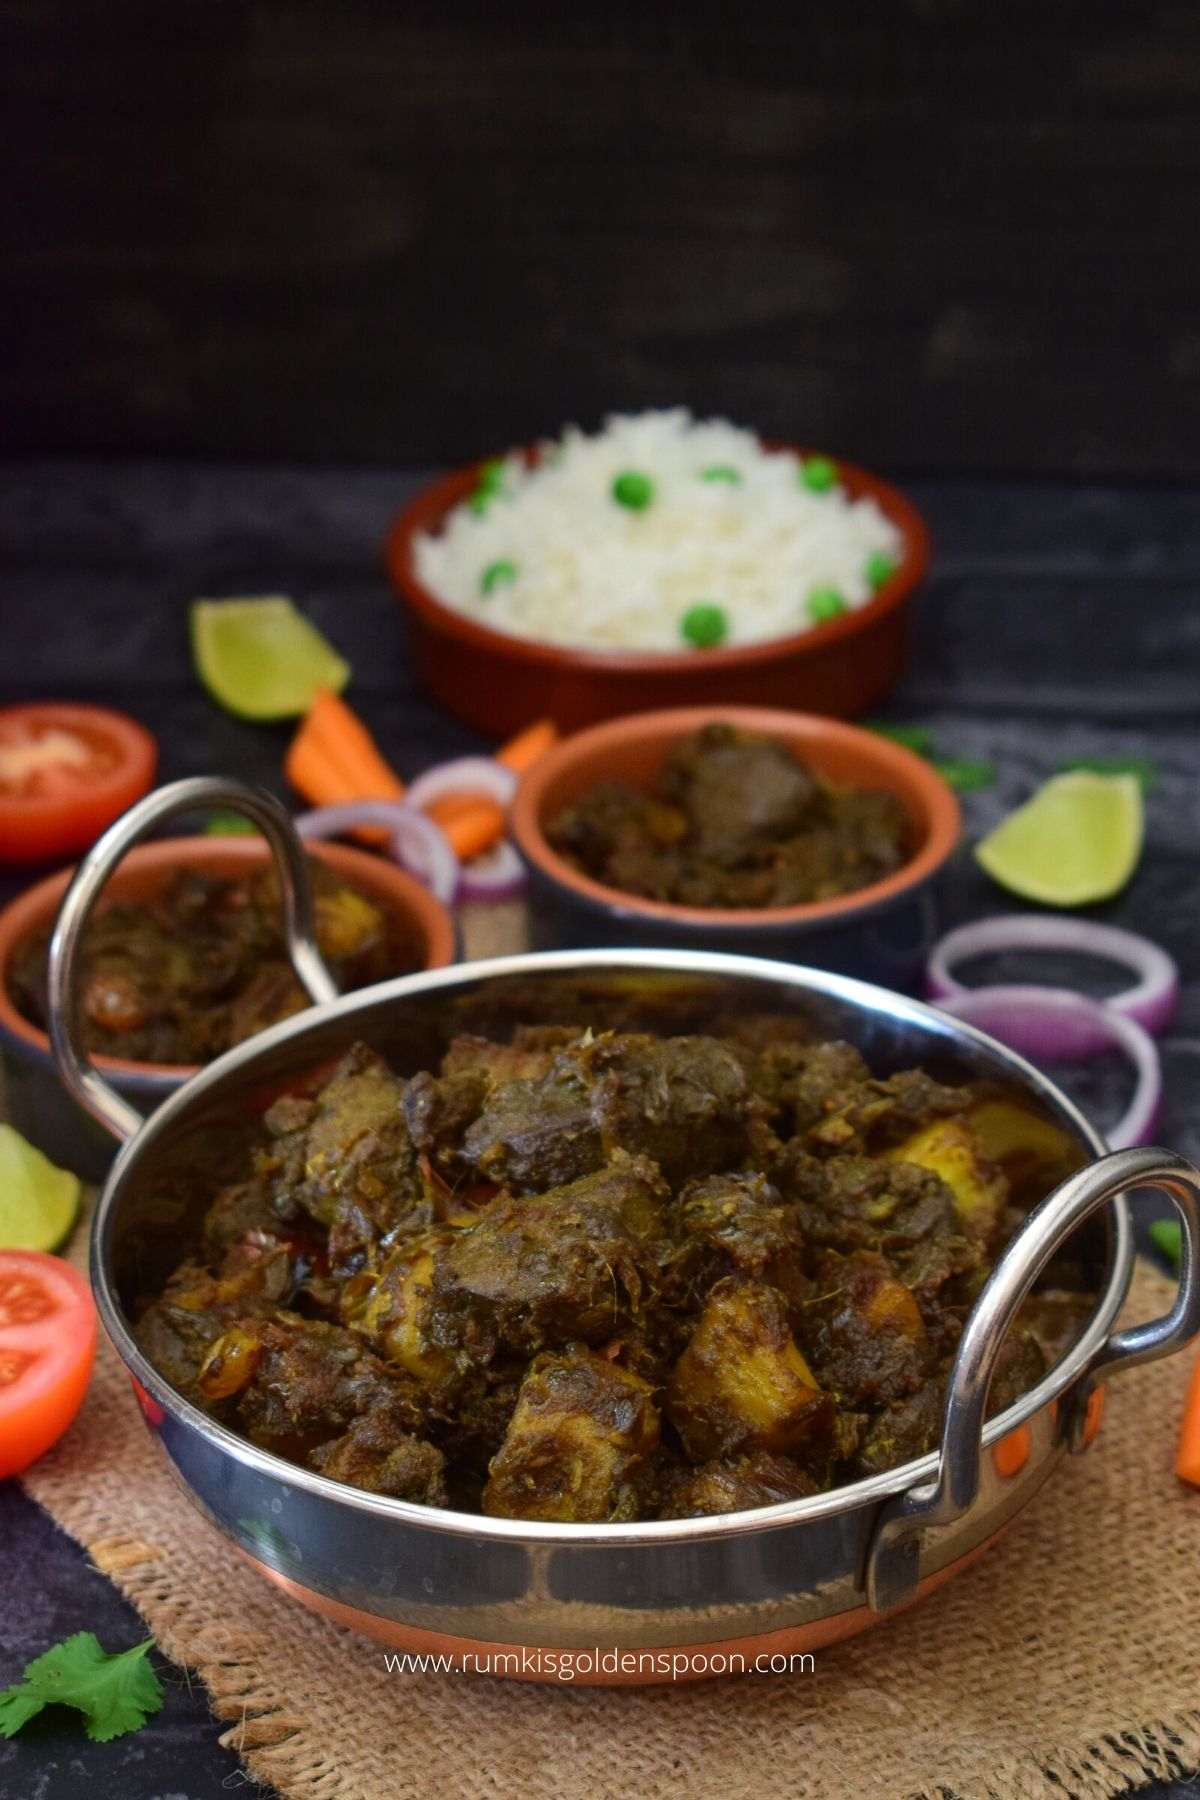 mutton liver curry, mutton liver curry recipe, mete chorchori, mete chorchori recipe, recipe of mutton liver curry, mete chorchori bengali recipe, mutton liver curry recipe bengali, how to cook mutton liver curry, lamb liver curry, lamb liver stir fry, mutton mete chorchori, mete chorchori meaning, bengali recipes, bengali food, traditional bengali food, Rumki's Golden Spoon